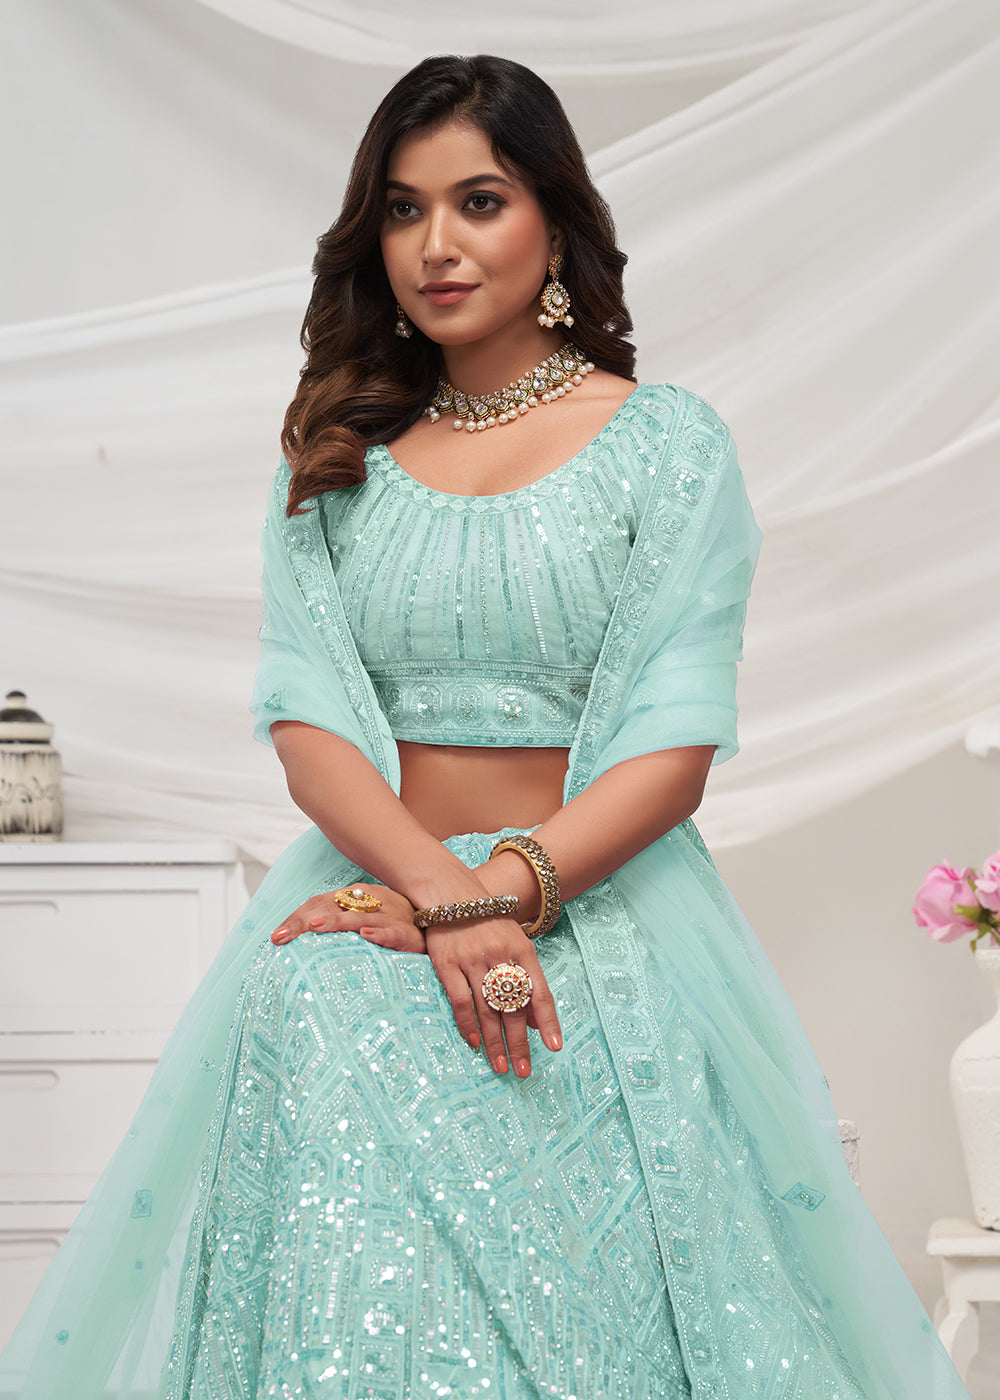 Buy Now Pearled Sky Blue Heavy Embroidered Bridal Lehenga Choli Online in USA, UK, Canada & Worldwide at Empress Clothing.